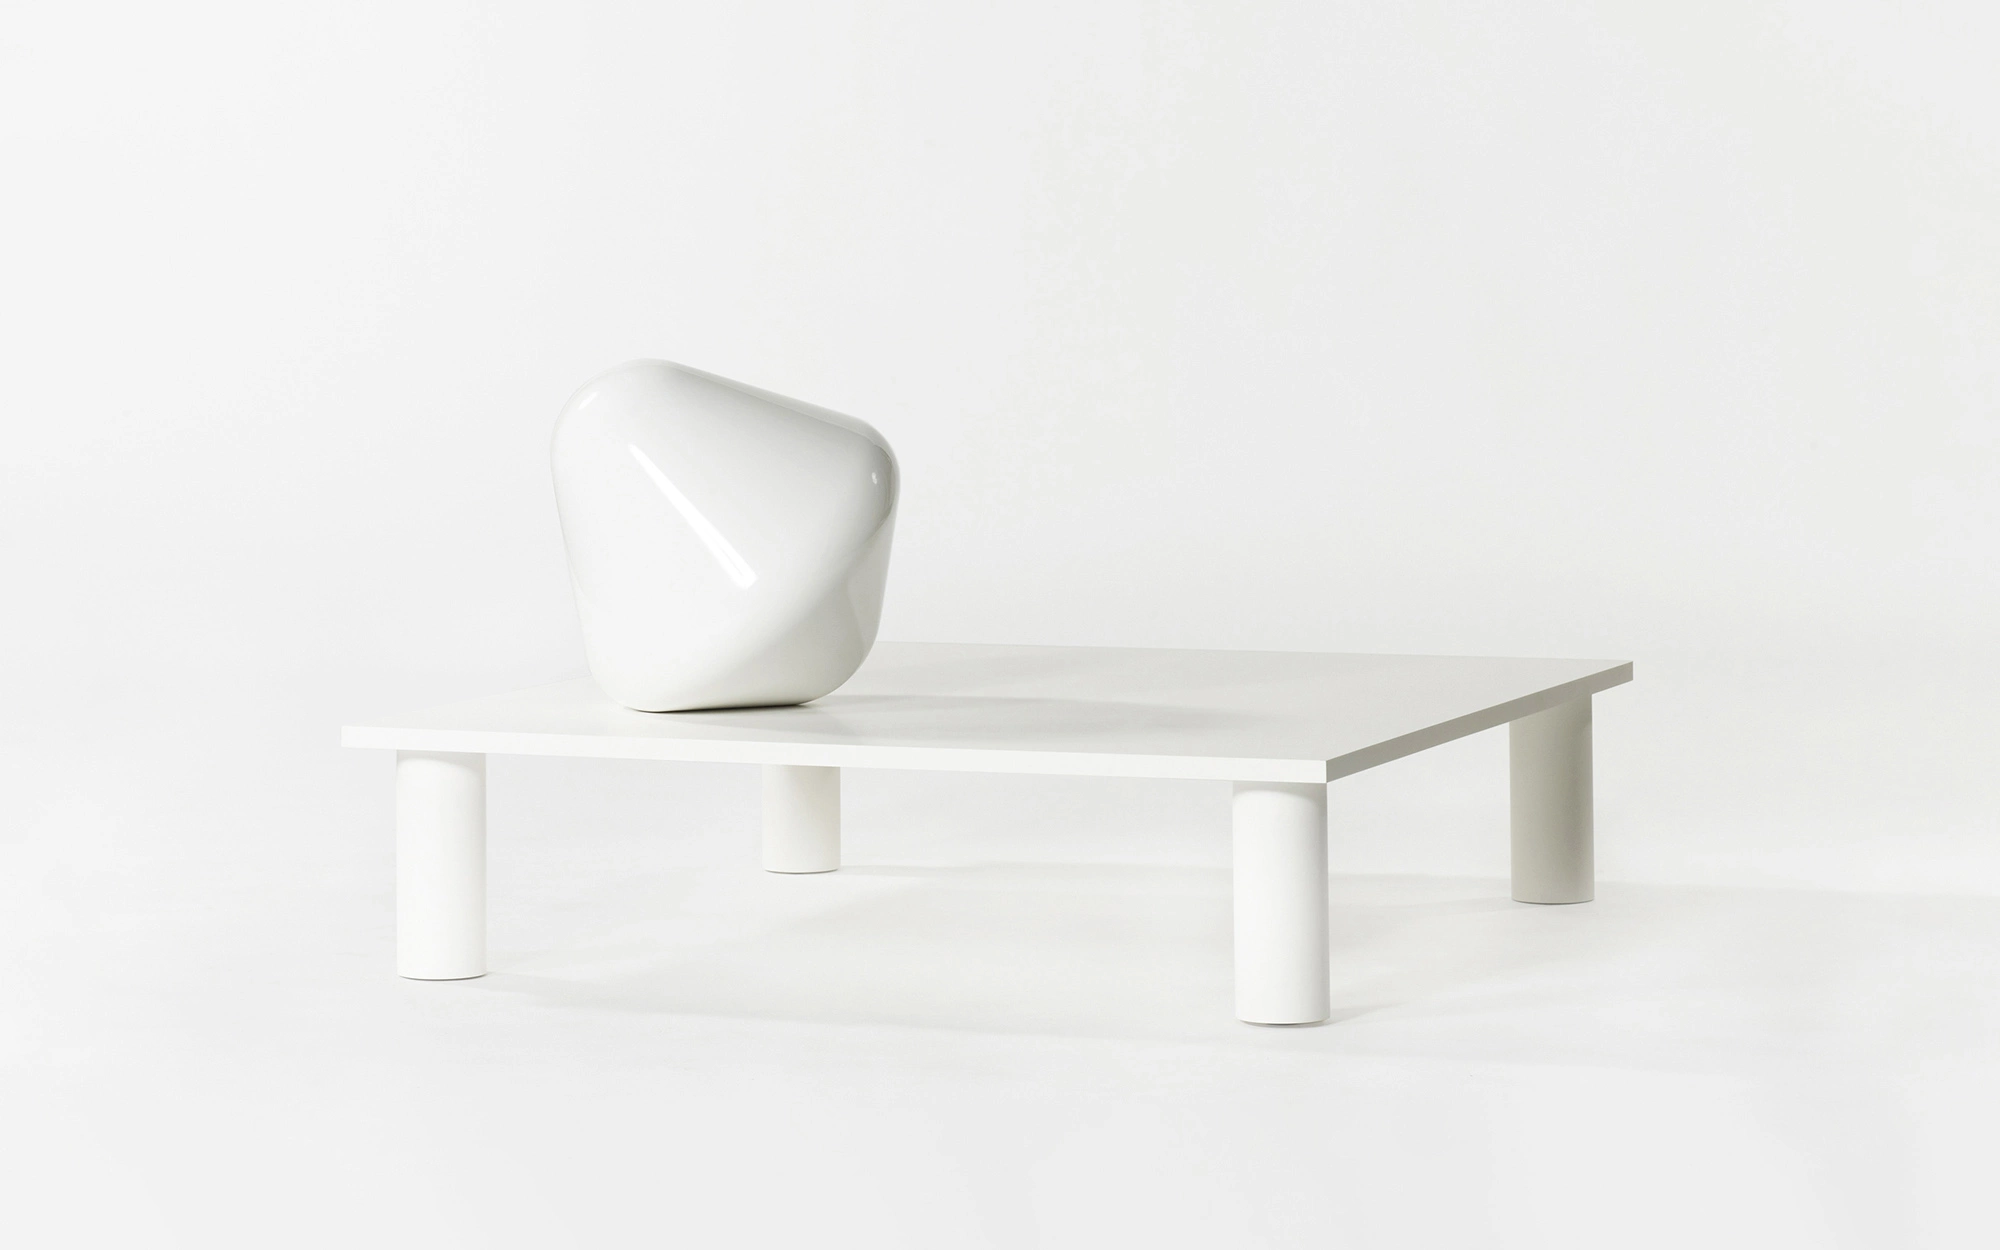 Ignotus Nomen Coffee Table - Pierre Charpin - Side table - Galerie kreo